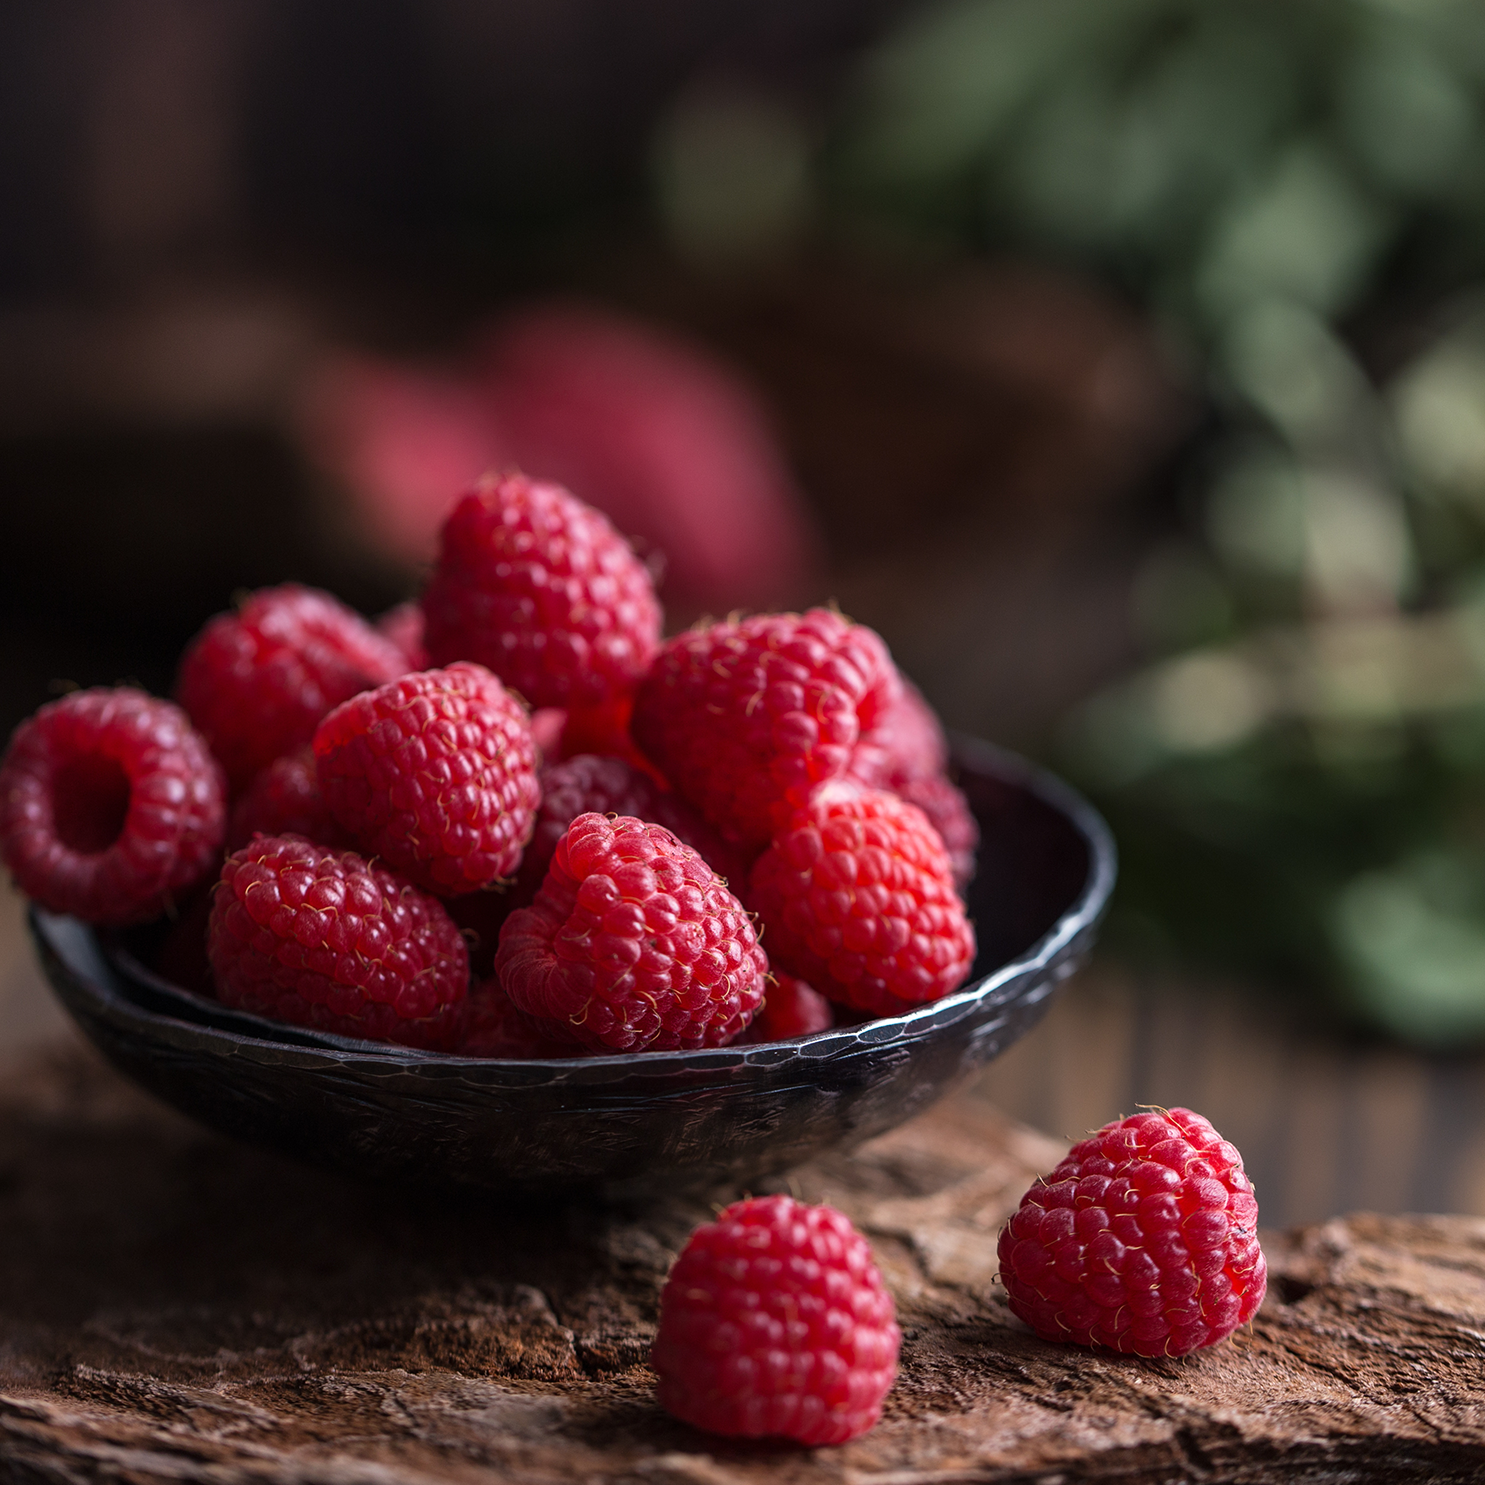 A bowl of fresh Raspberry & Sandalwood (12 oz) from the Tuscany Candle® EVD collection on a rustic wooden surface with soft, blurred greenery in the background.